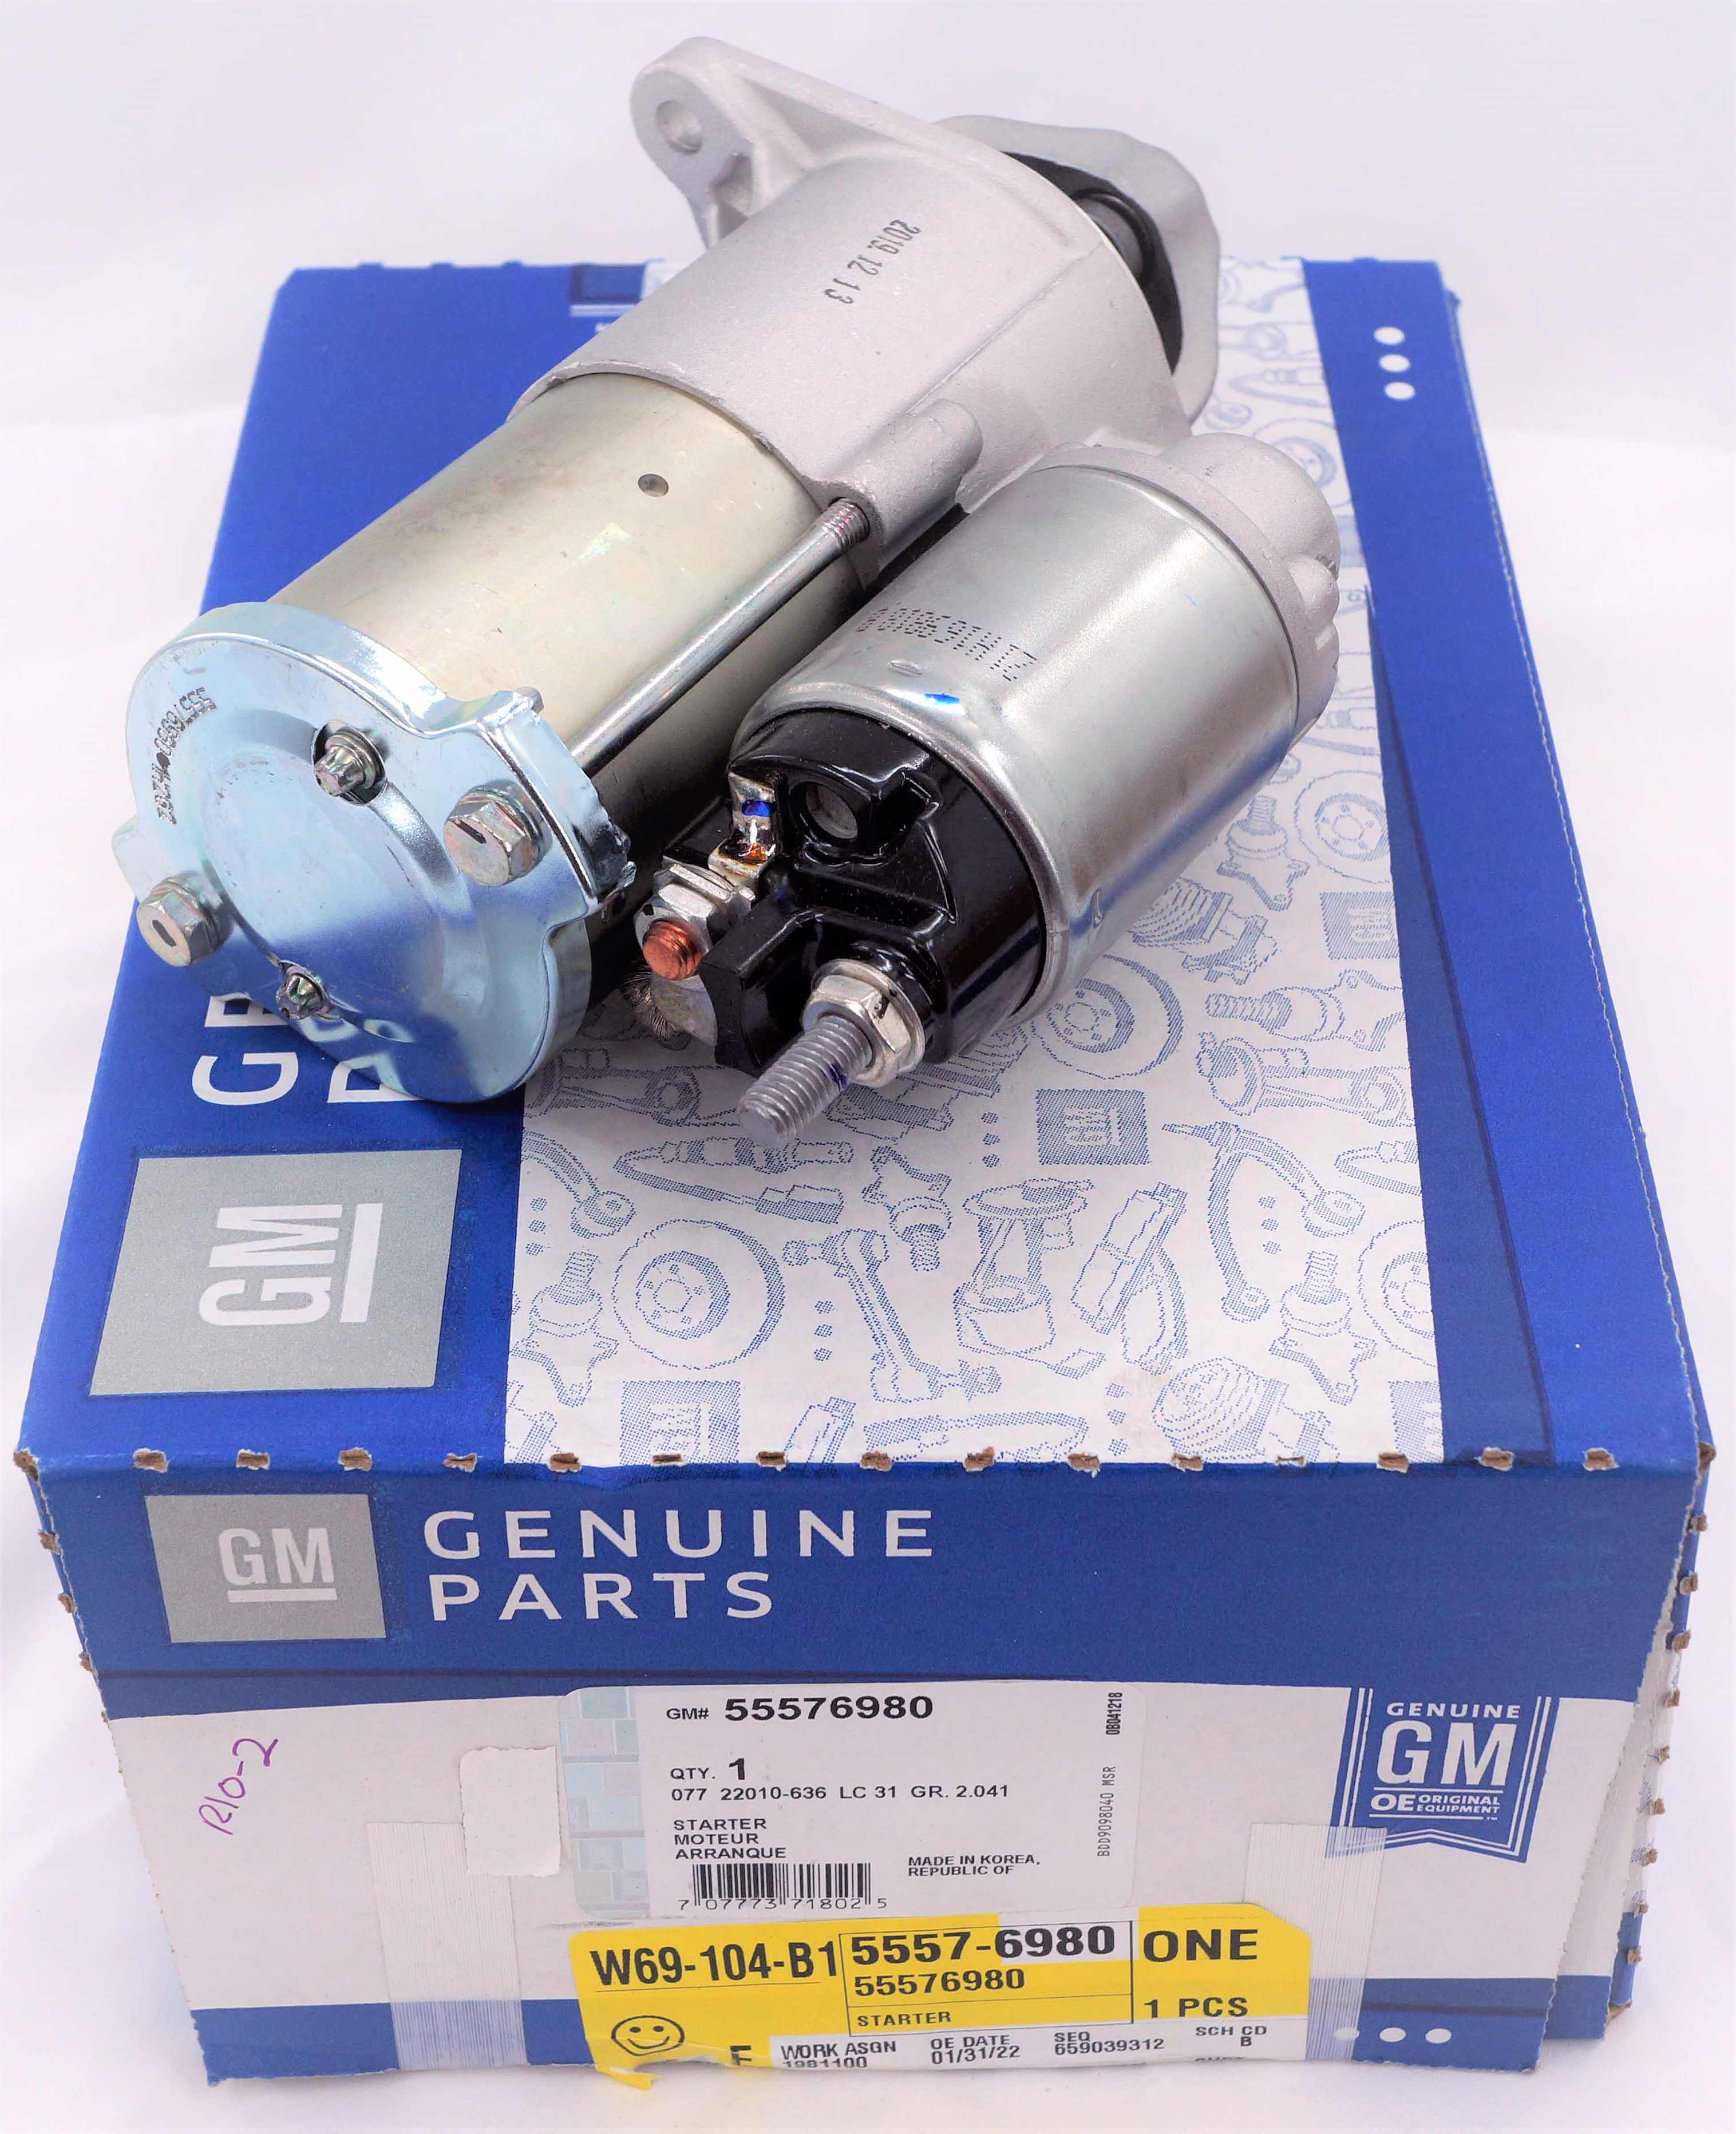 Genuine OEM 55576980 GM Starter Motor Fits Chevy Cruze and